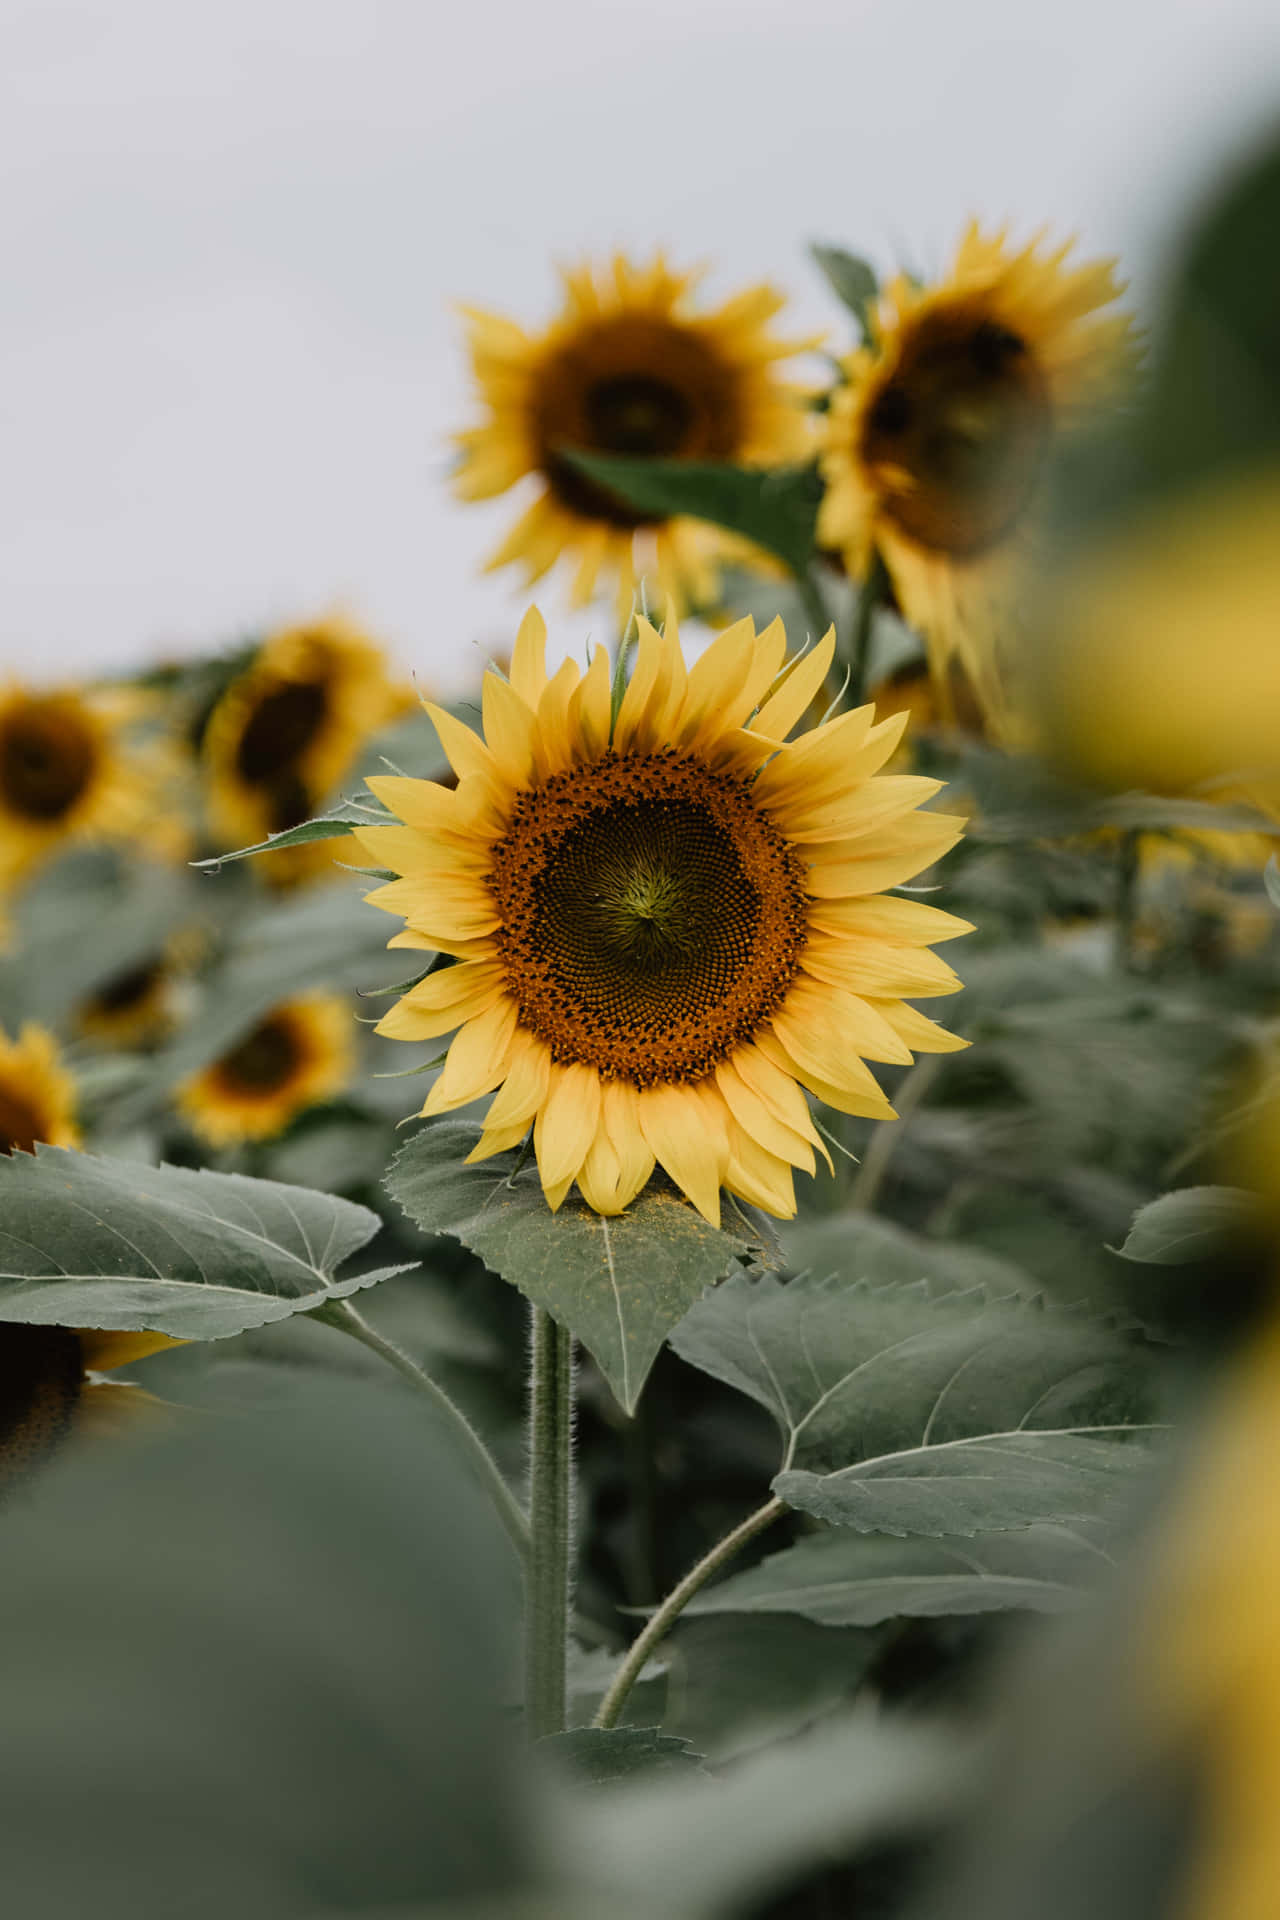 Bright and cheery yellow sunflowers are a welcome sight of summer. Wallpaper